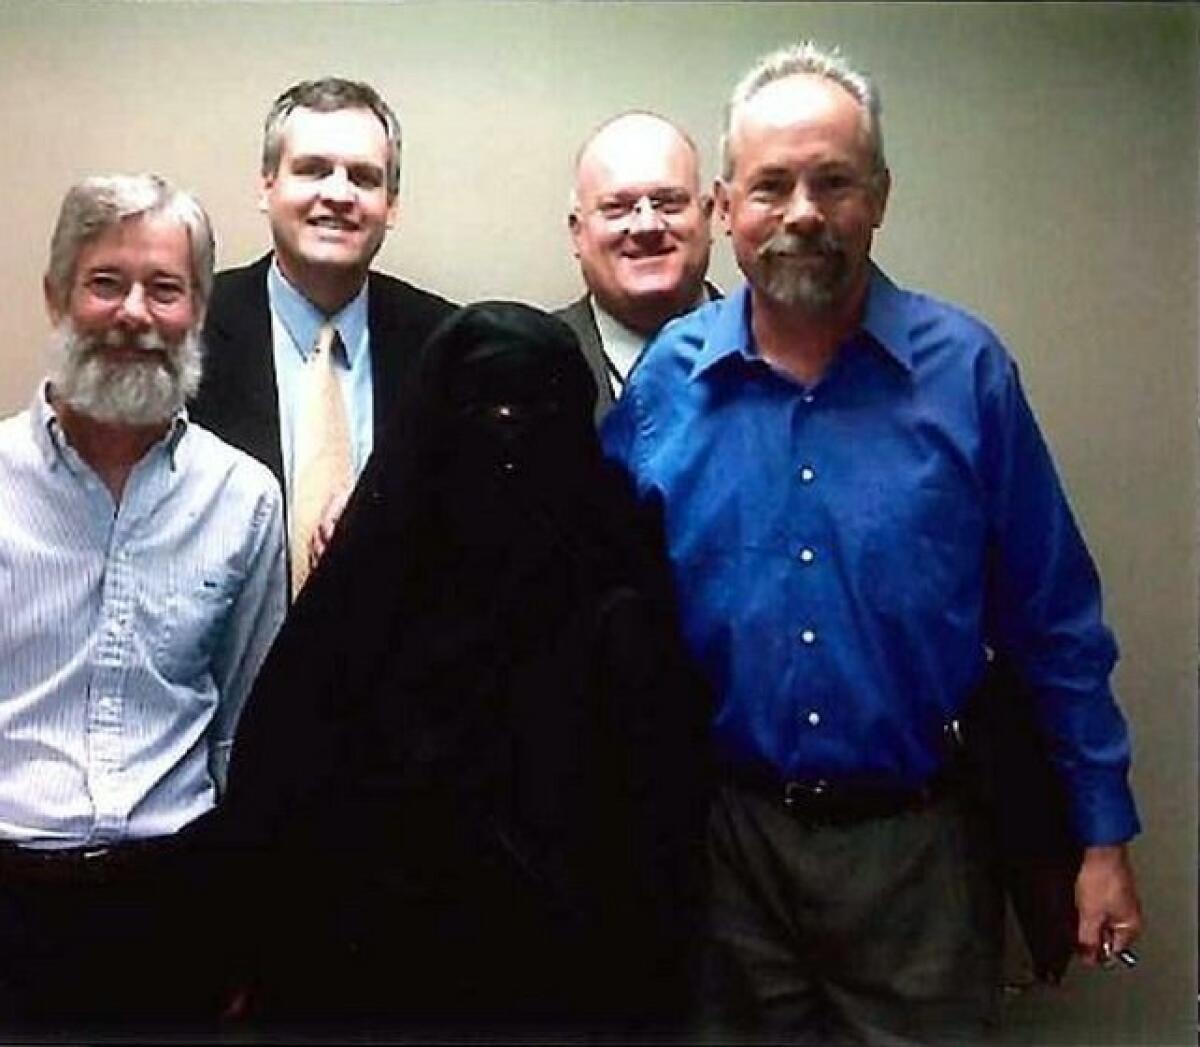 Engineering manager George Briest, human resources manager Thomas Wood, operations manager Tom Kennedy and retired operations supervisor Eric Phillips posed with Kim Thorner, in the office in November 2009.